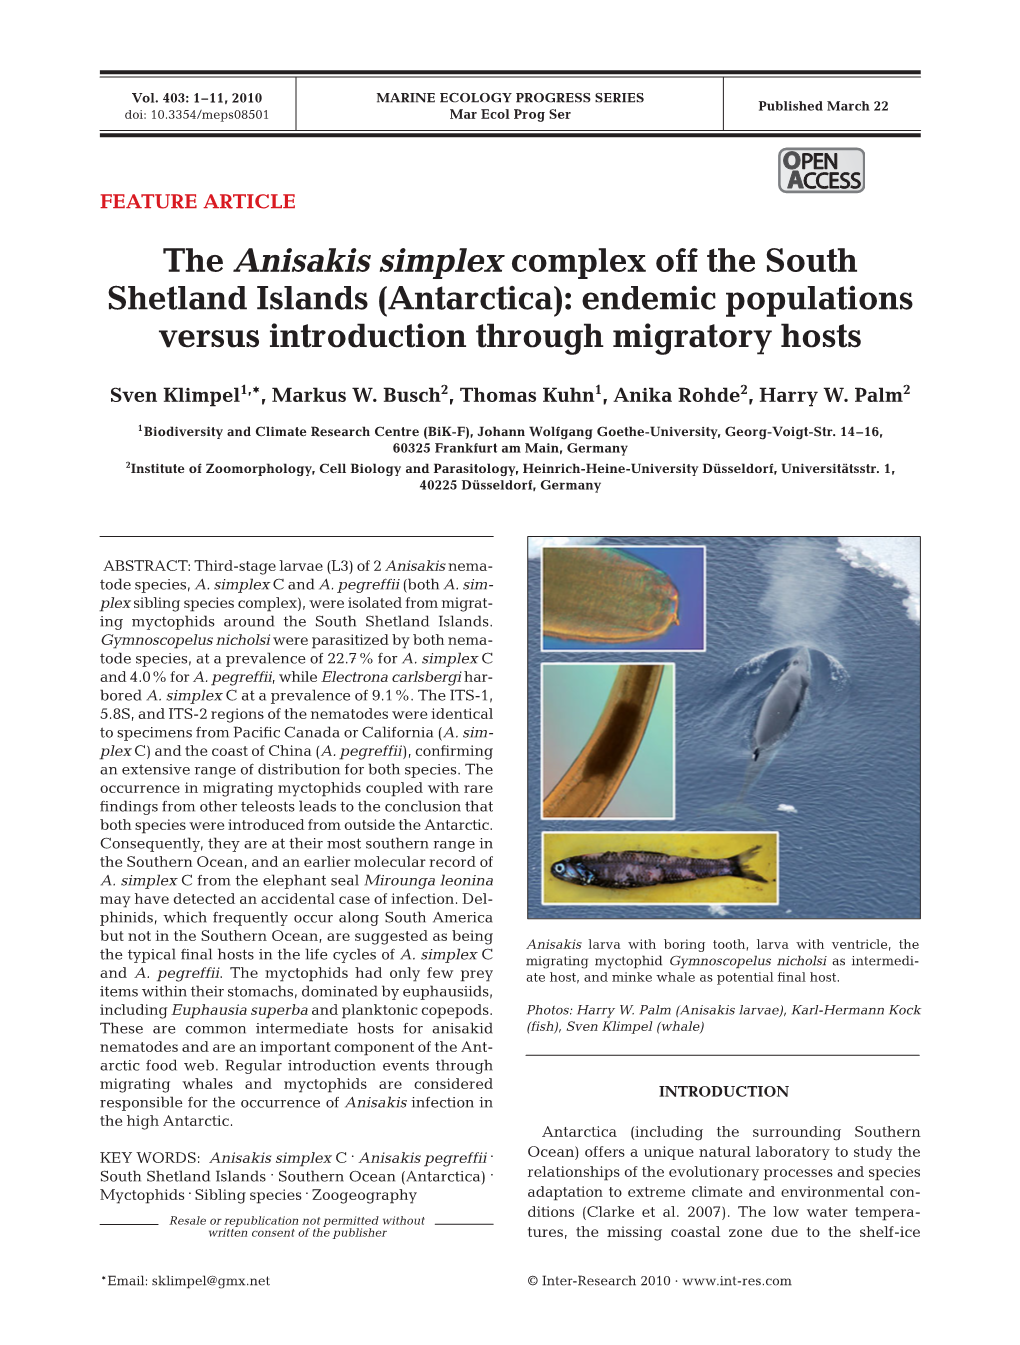 The Anisakis Simplex Complex Off the South Shetland Islands (Antarctica): Endemic Populations Versus Introduction Through Migratory Hosts